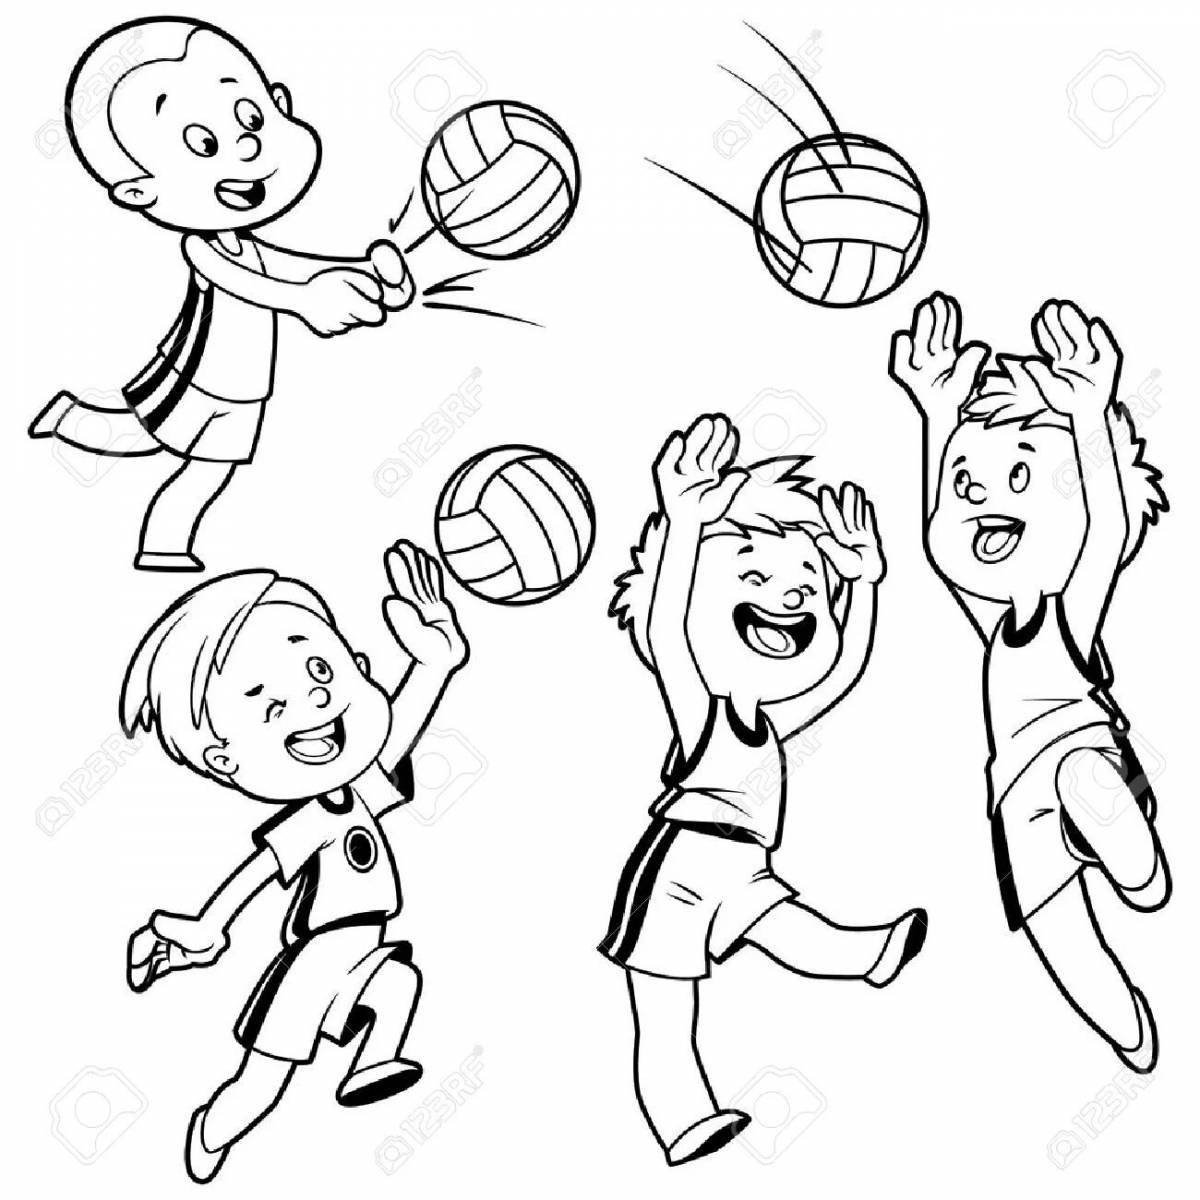 Colourful volleyball coloring book for the little ones